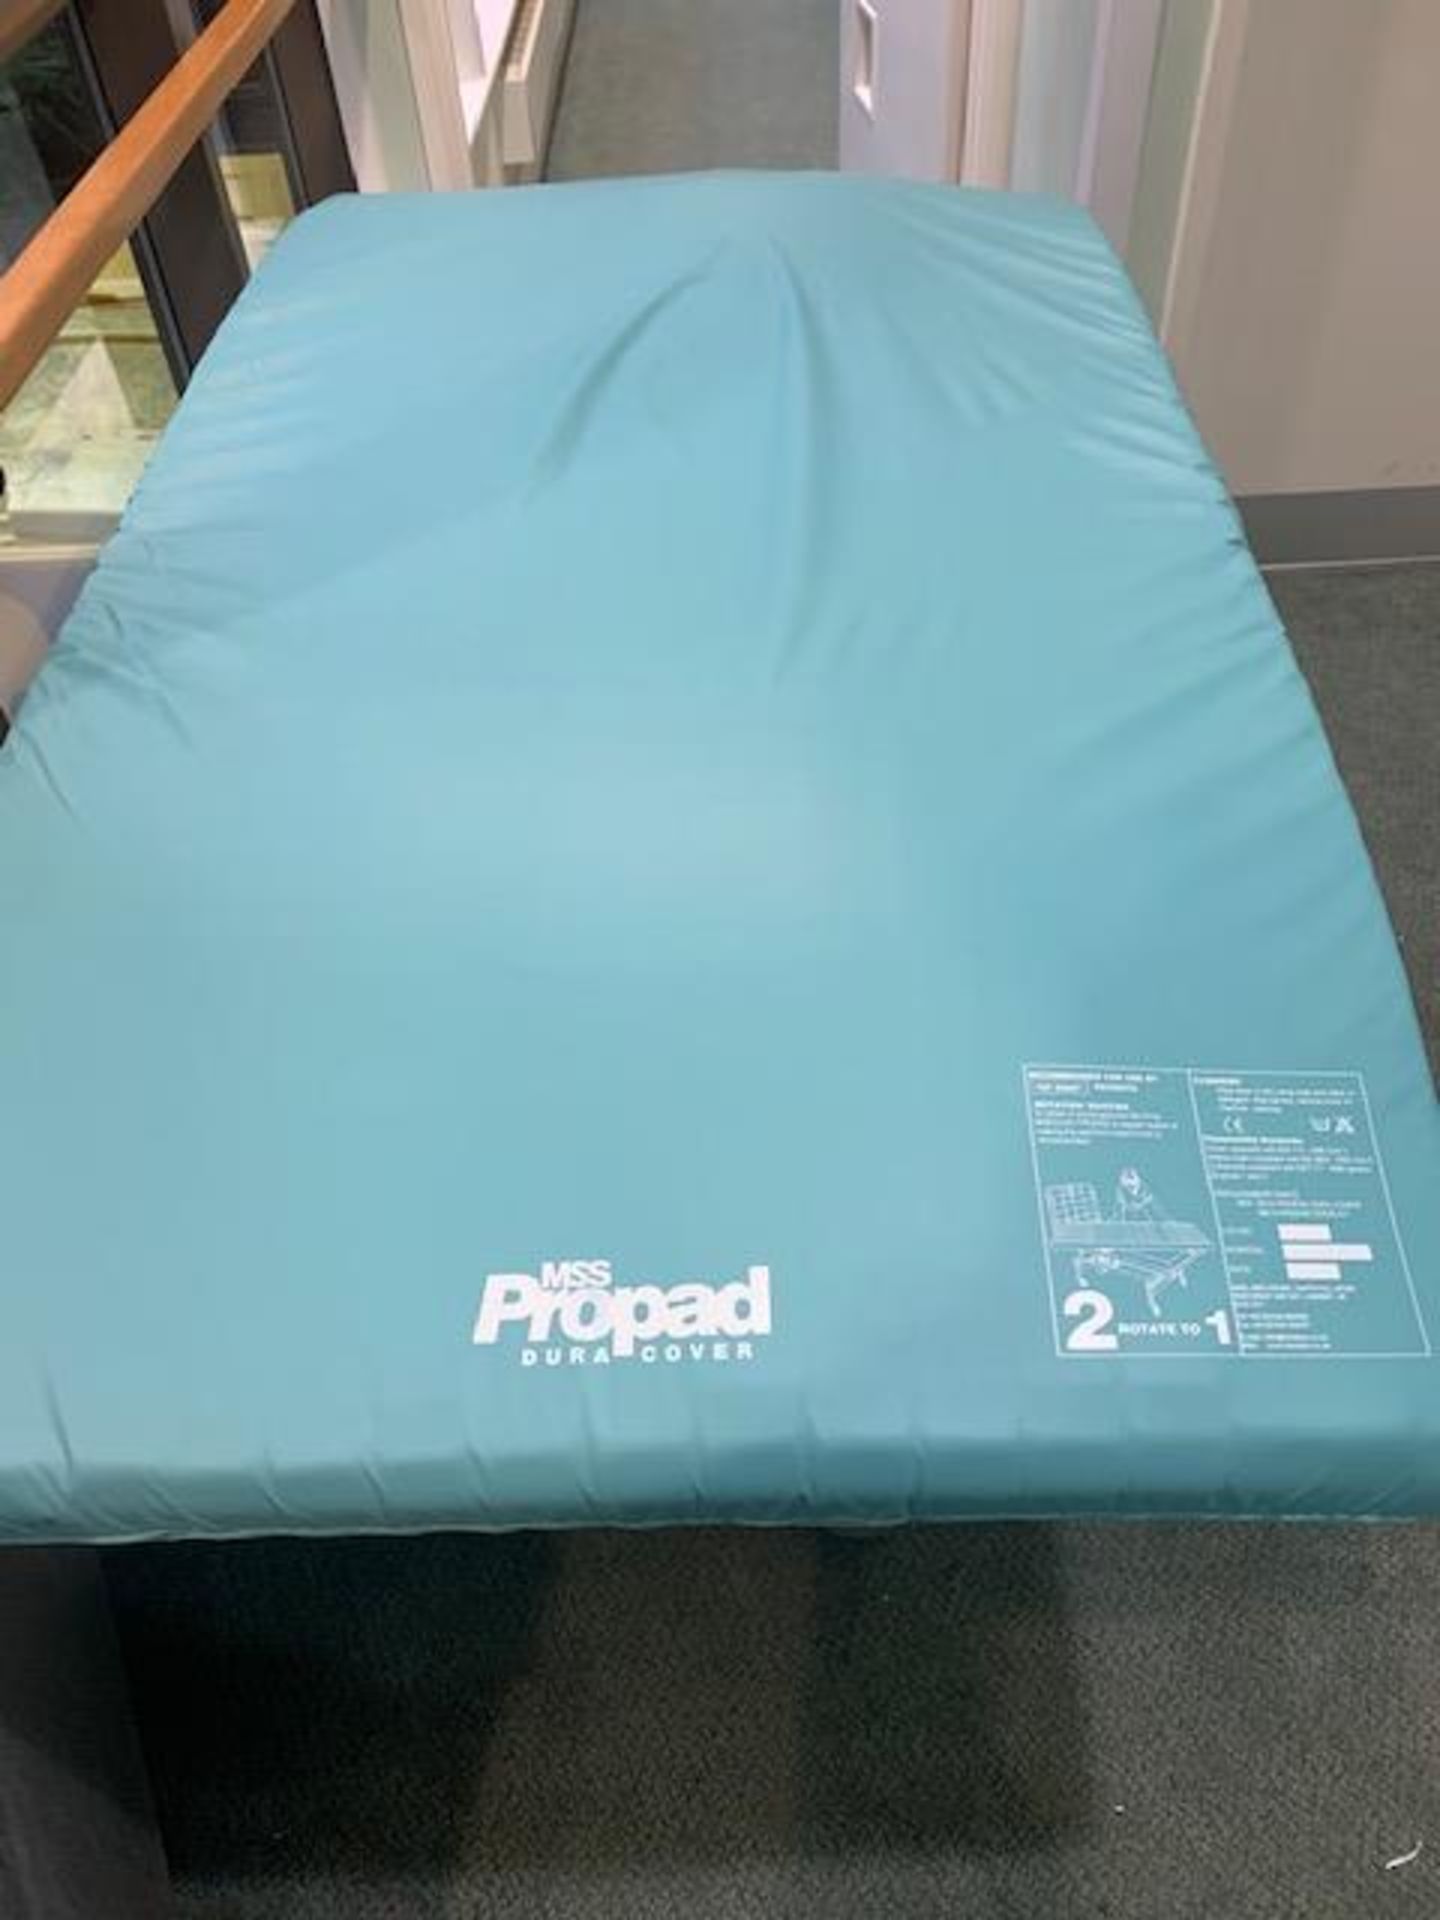 Two MSS Propad Dura Covers medical mattress overlays